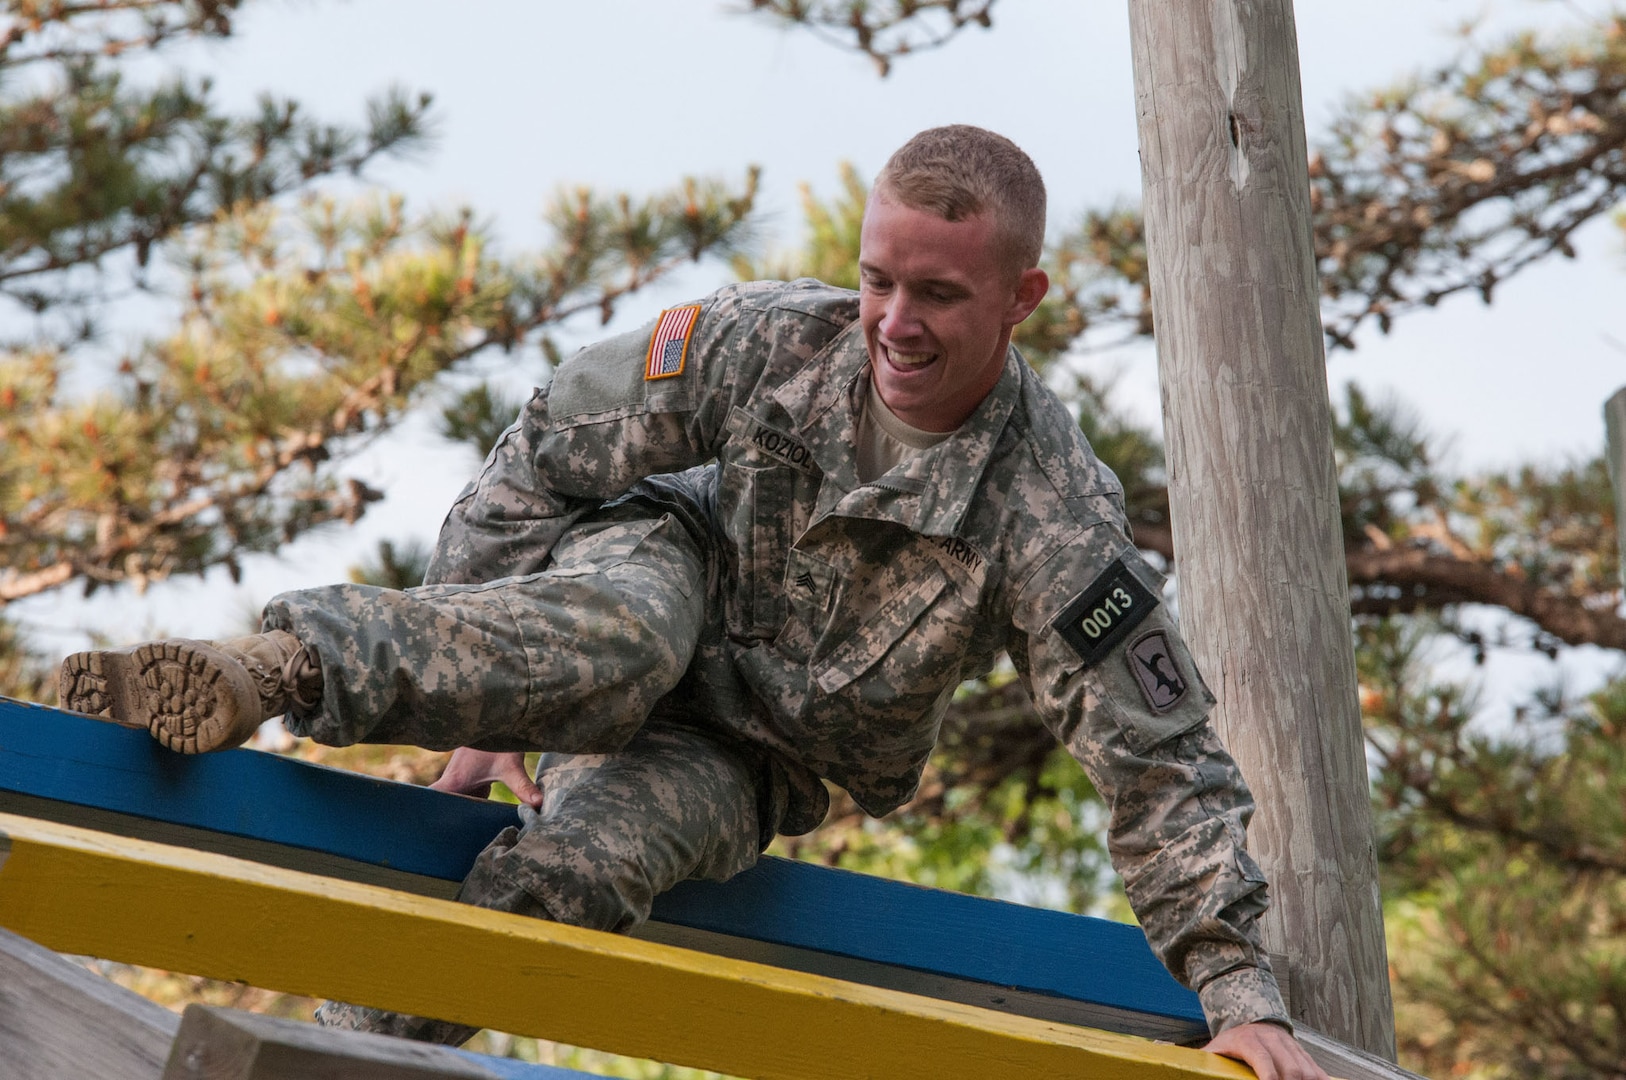 Army Sgt. Calvin Koziol, an Infantryman with Charlie Company, 1-134th Cavalry Squadron, Nebraska Army National Guard, negotiates through the obstacle course in the 2016 Army National Guard Best Warrior Competition at Camp Edwards on Joint Base Cape Cod, June 22, 2016. Koziol was named the 2016 Army National Guard Soldier of the Year at the end of the competition, which tested competitors on a variety of tactical and technical skills over a physically and mentally demanding three days. Army Staff Sgt. Dirk Omerzo, a Basic Leader Course Instructor, 3-166th Regiment, Pennsylvania Army National Guard, was named the Army National Guard's NCO of the Year. 